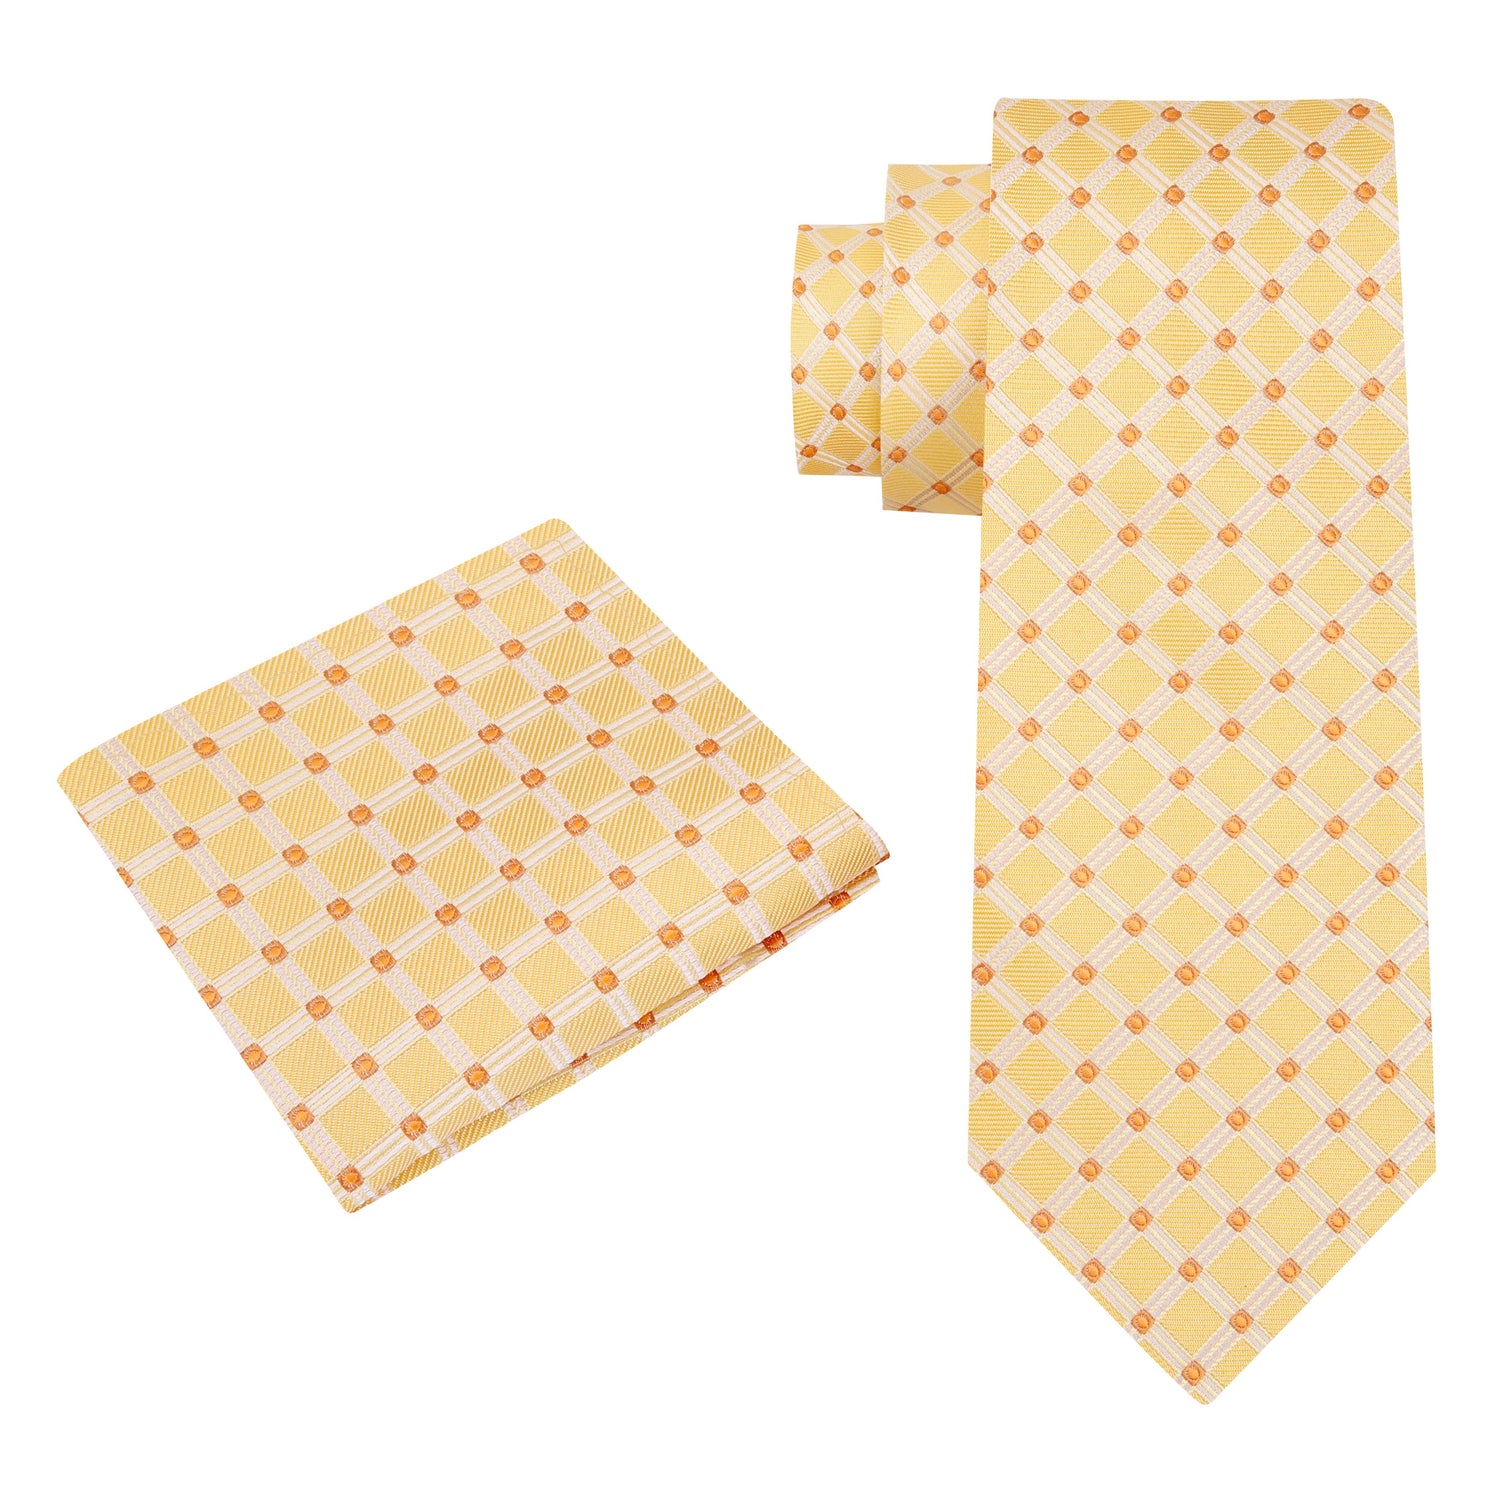 Alt View: A Yellow Gold, Amber Geometric Diamond With Small Check Pattern Silk Necktie, Matching Pocket Square